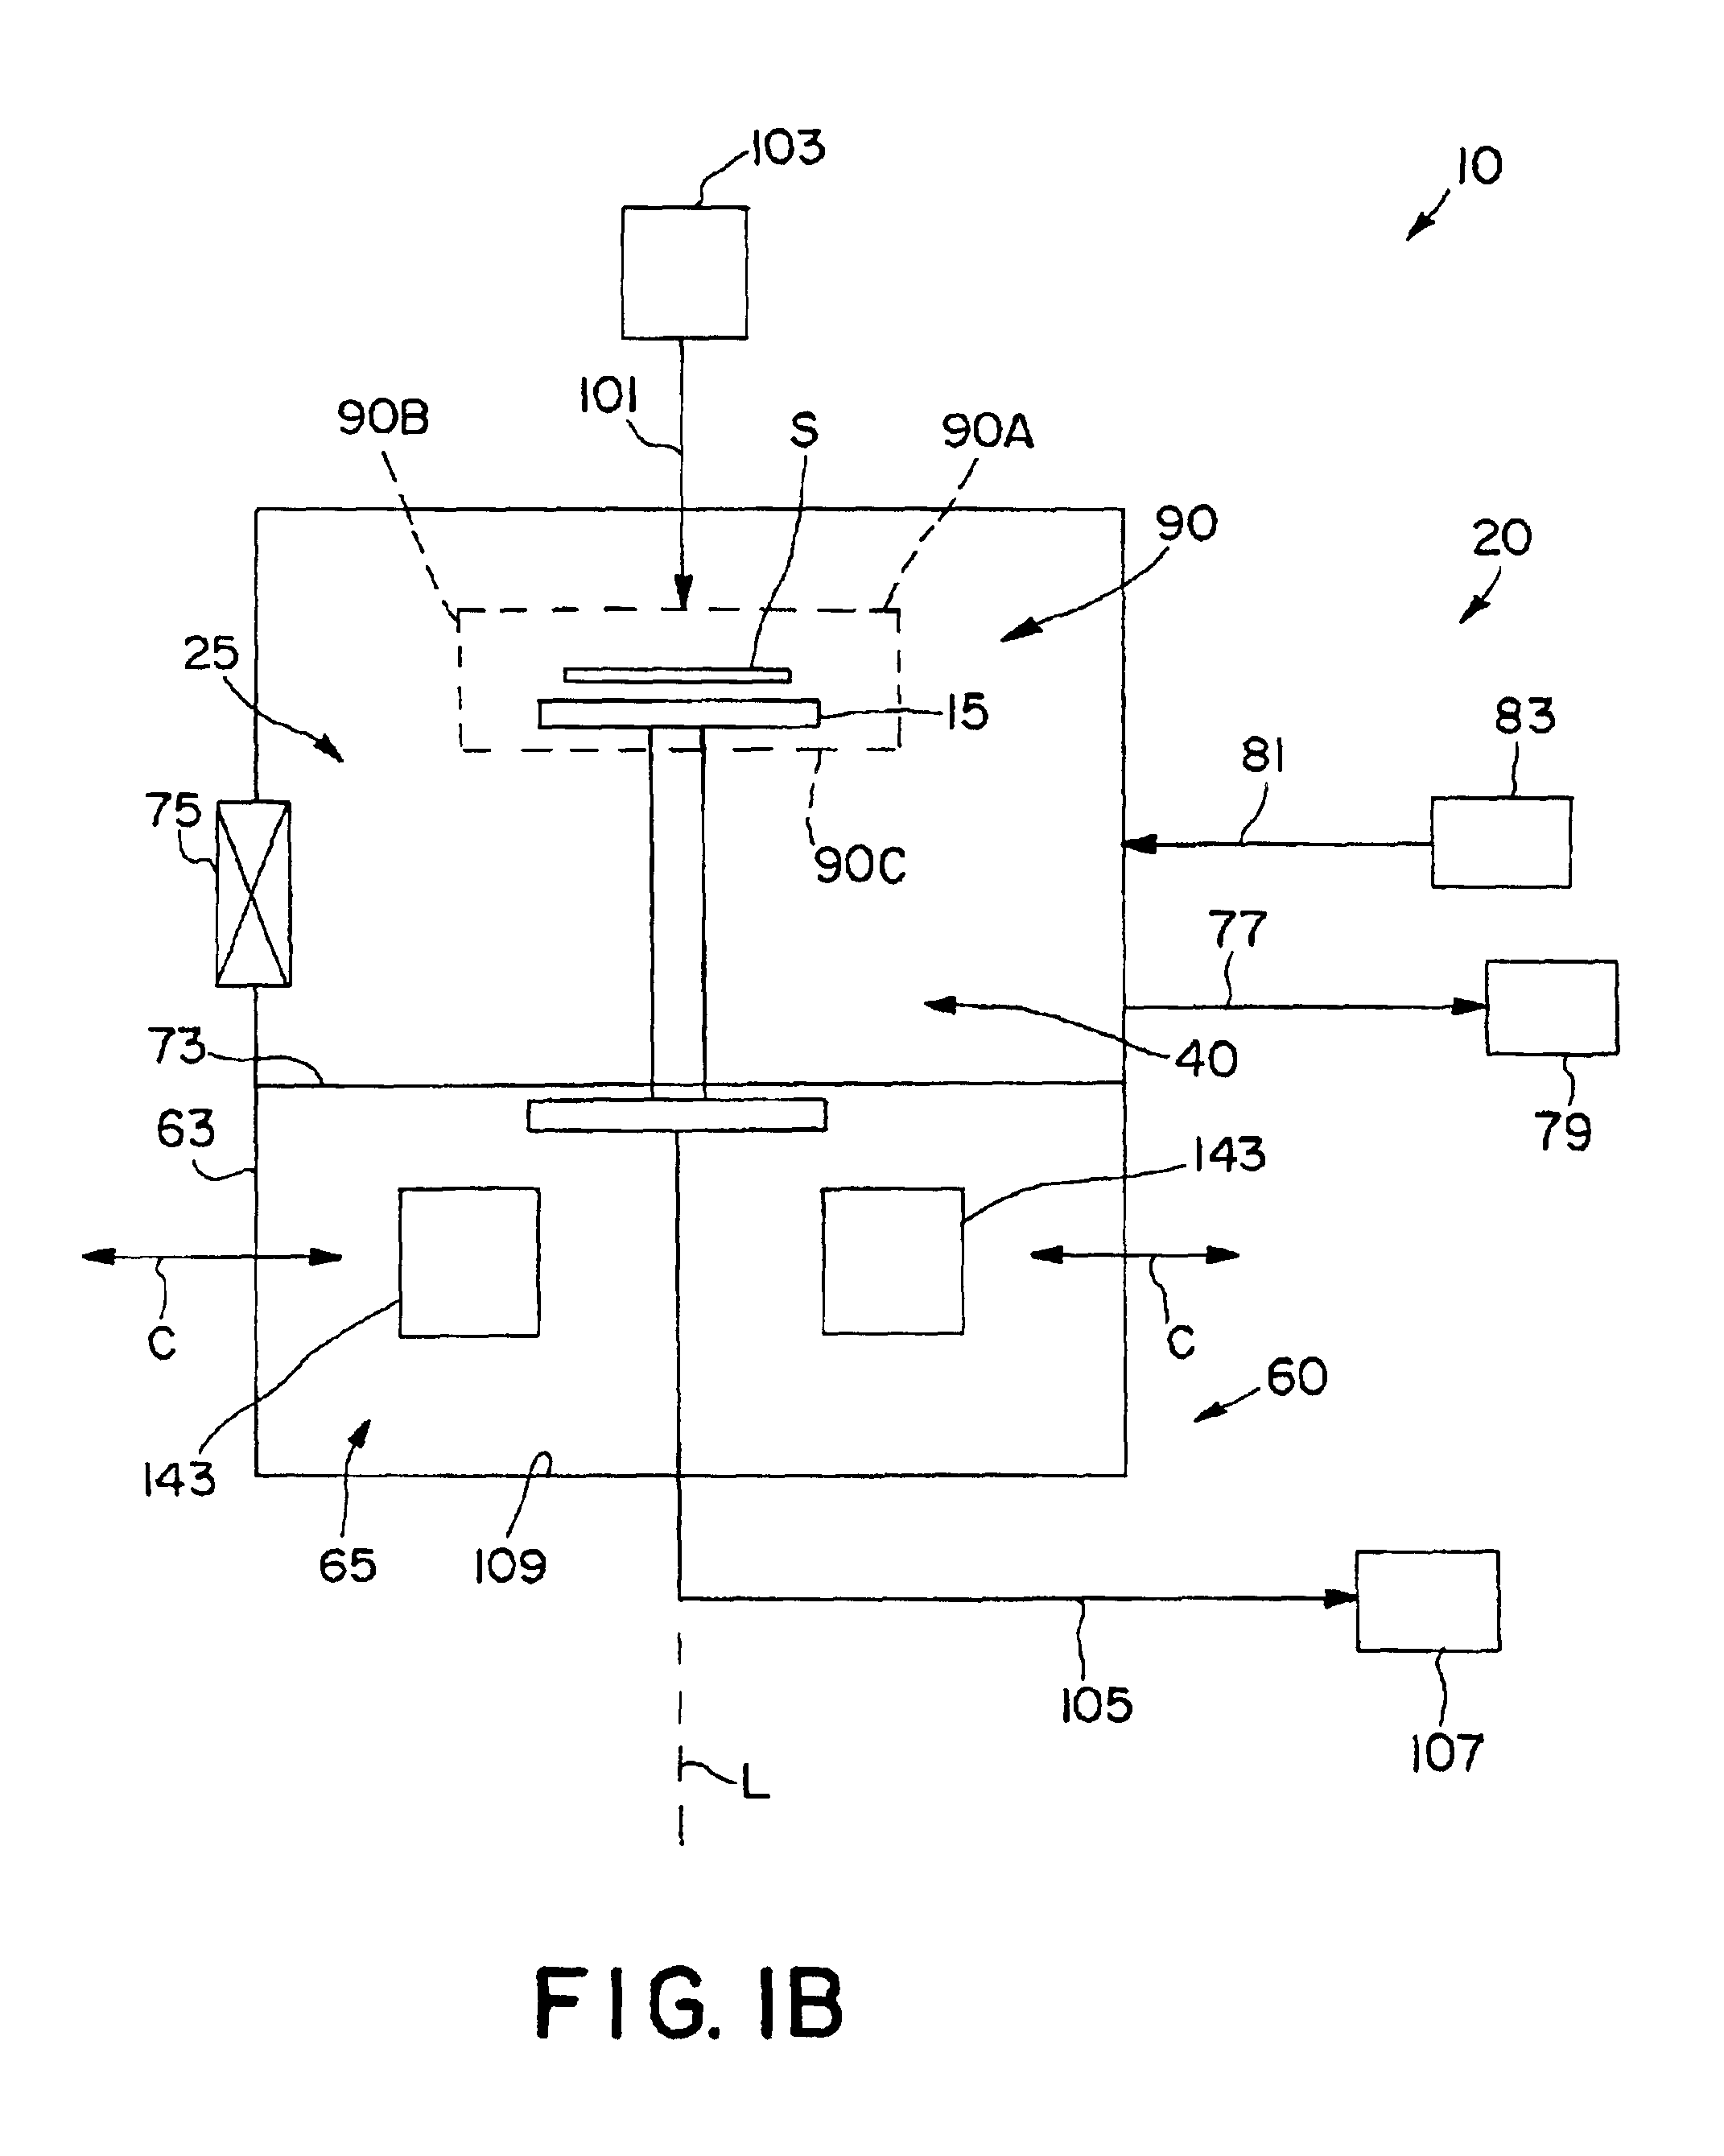 Substrate processing apparatus and related systems and methods